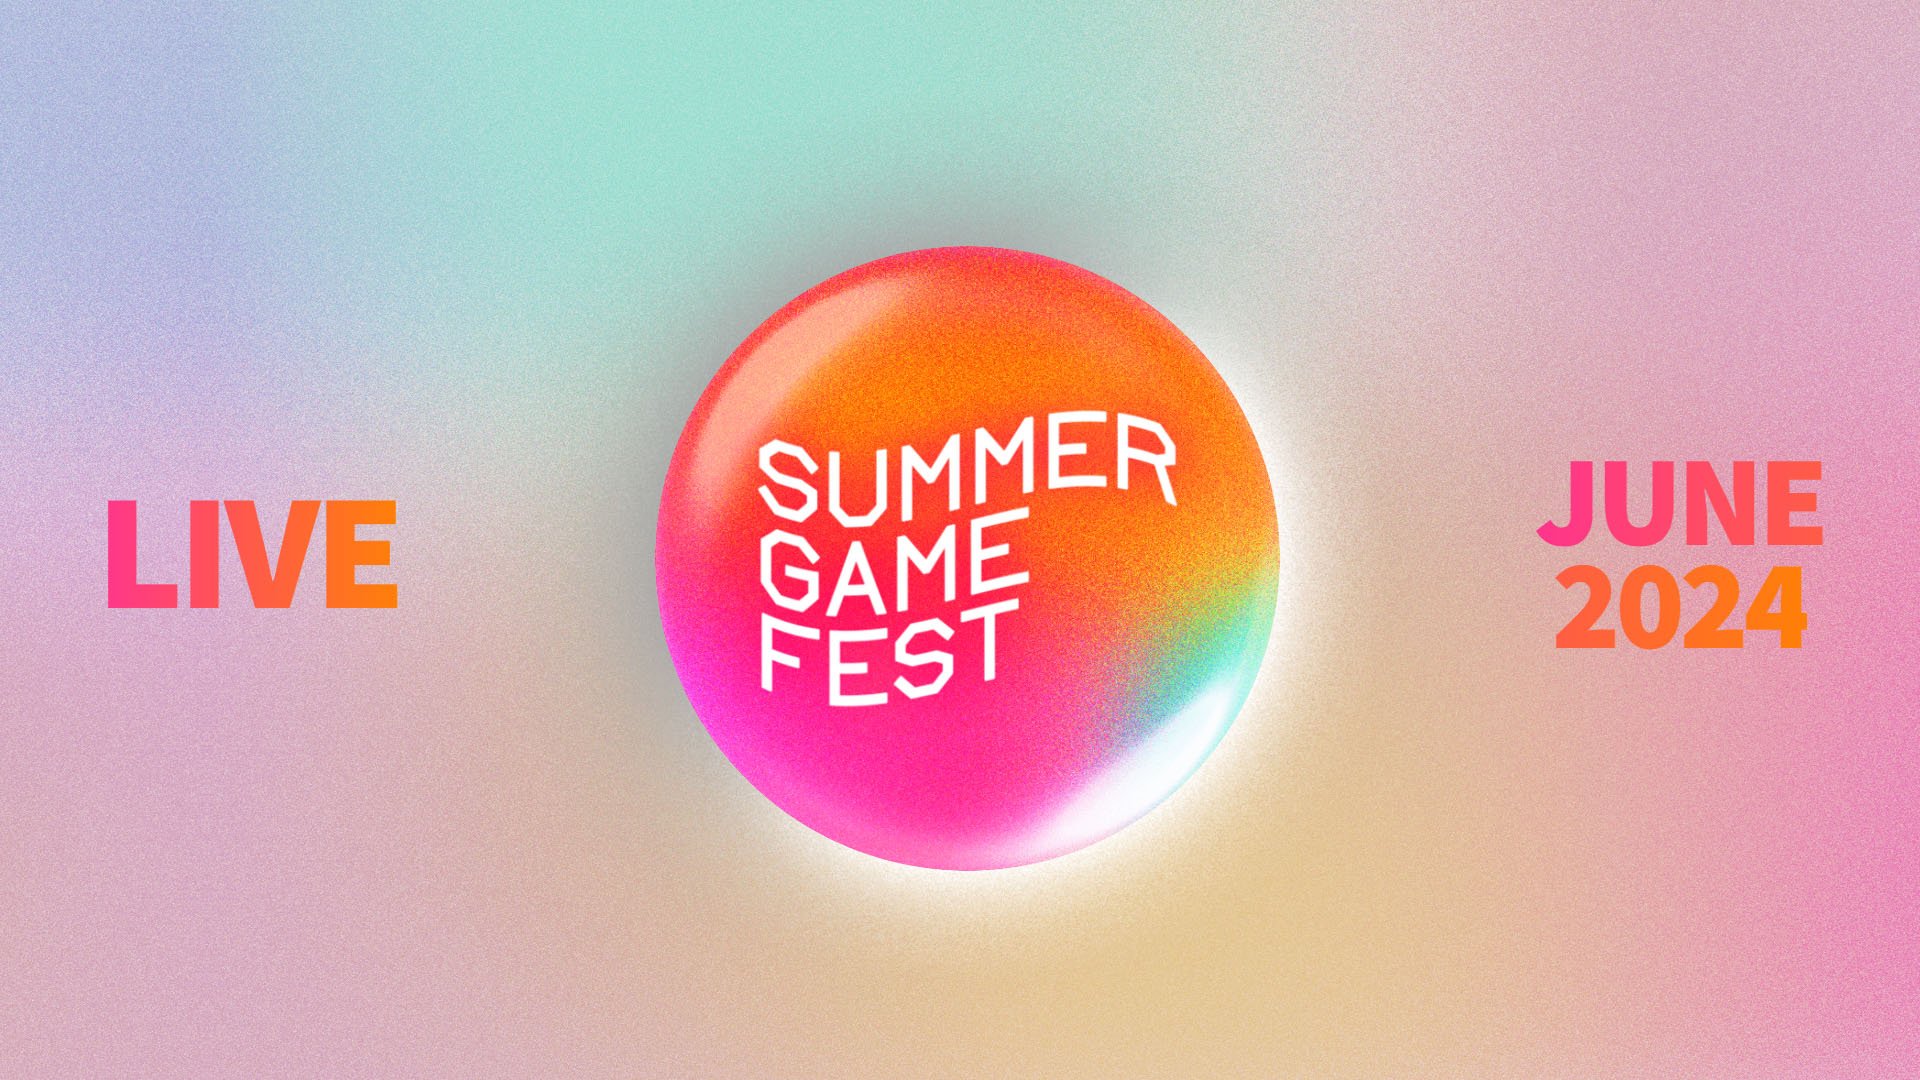 Summer Game Fest 2024 Date Announced Hours After Geoff Keighley Speaks For The First Time About Layoffs